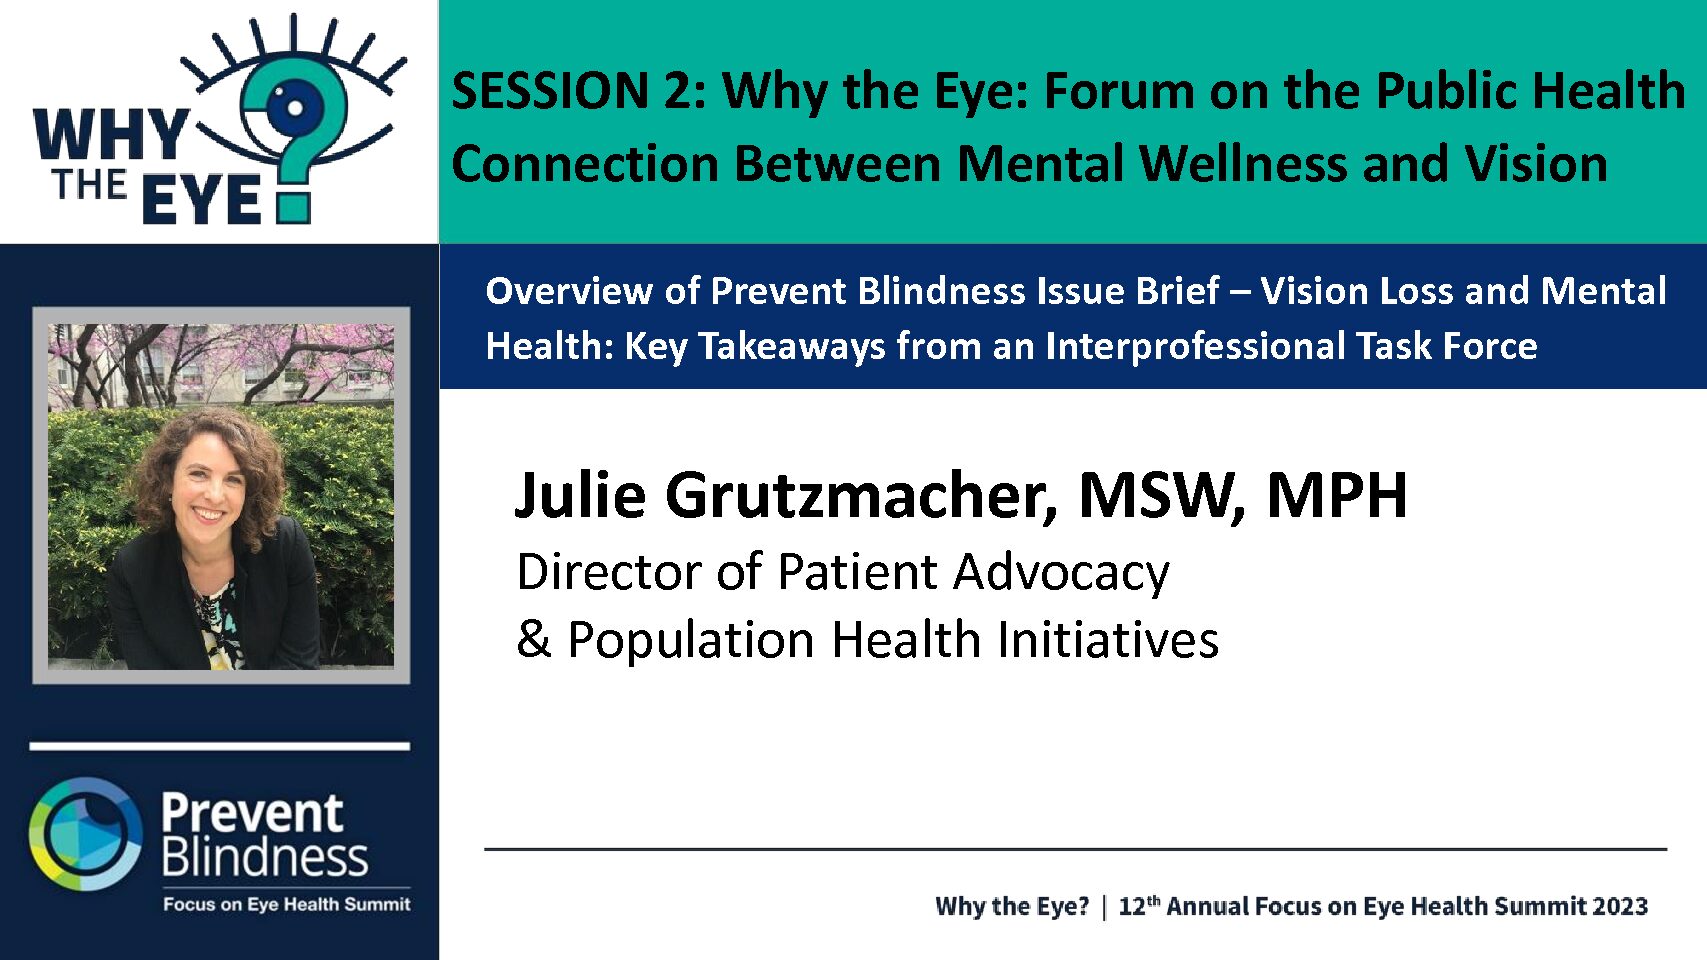 Why the Eye: Forum on the Public Health Connection Between Mental Wellness and Vision